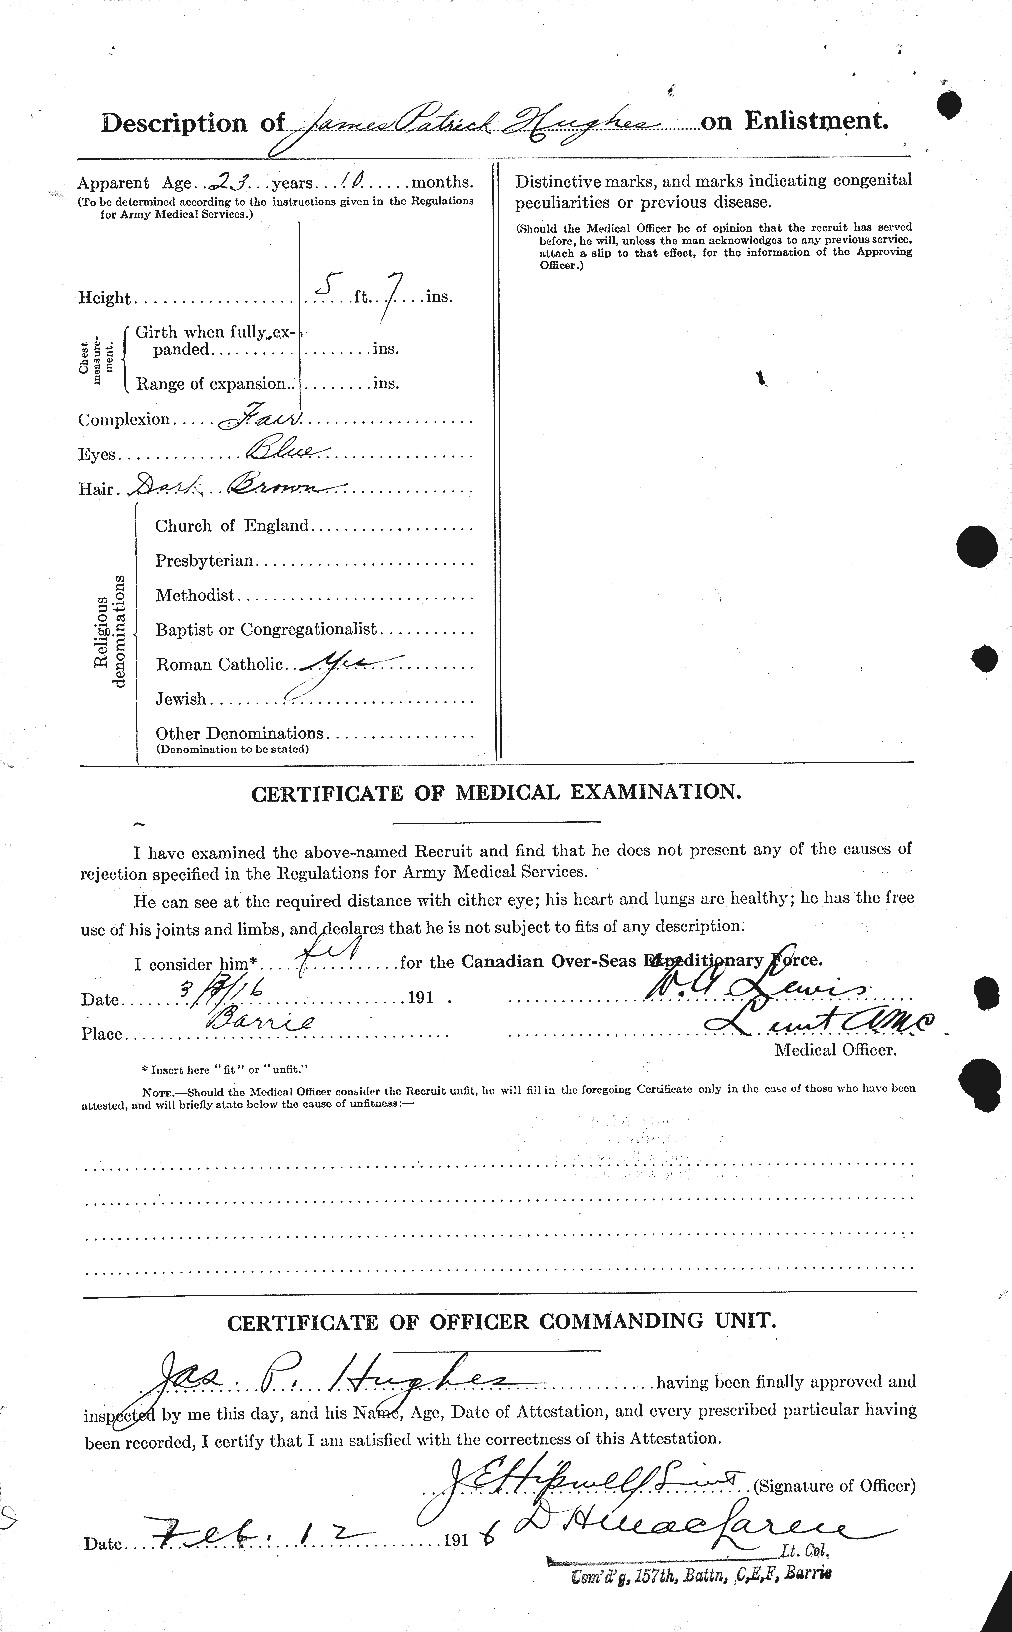 Personnel Records of the First World War - CEF 403970b